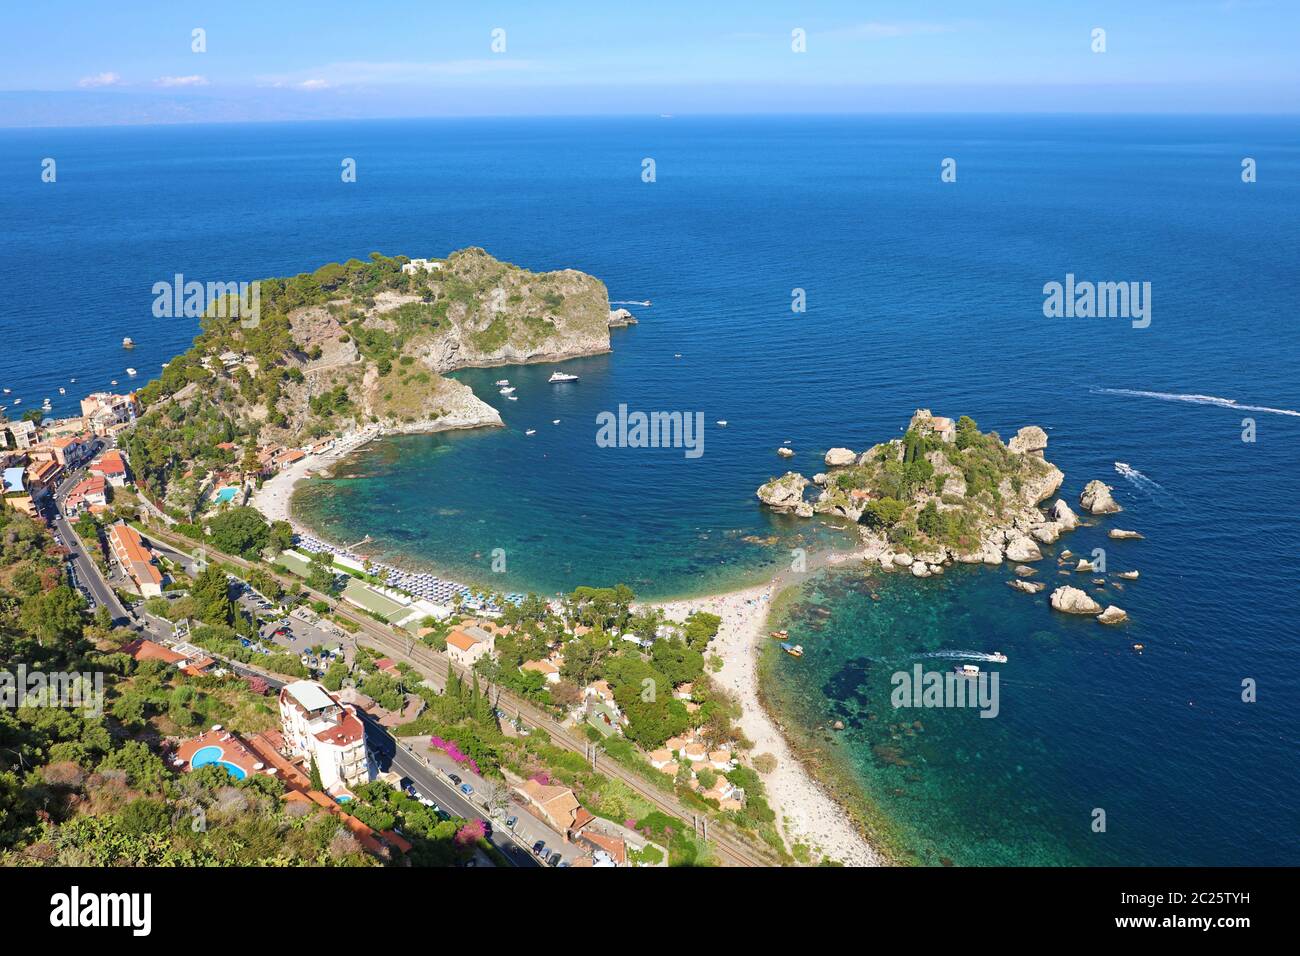 Beautiful aerial view of Taormina, Italy. Sicilian seascape with Isola Bella island and beach. Stock Photo